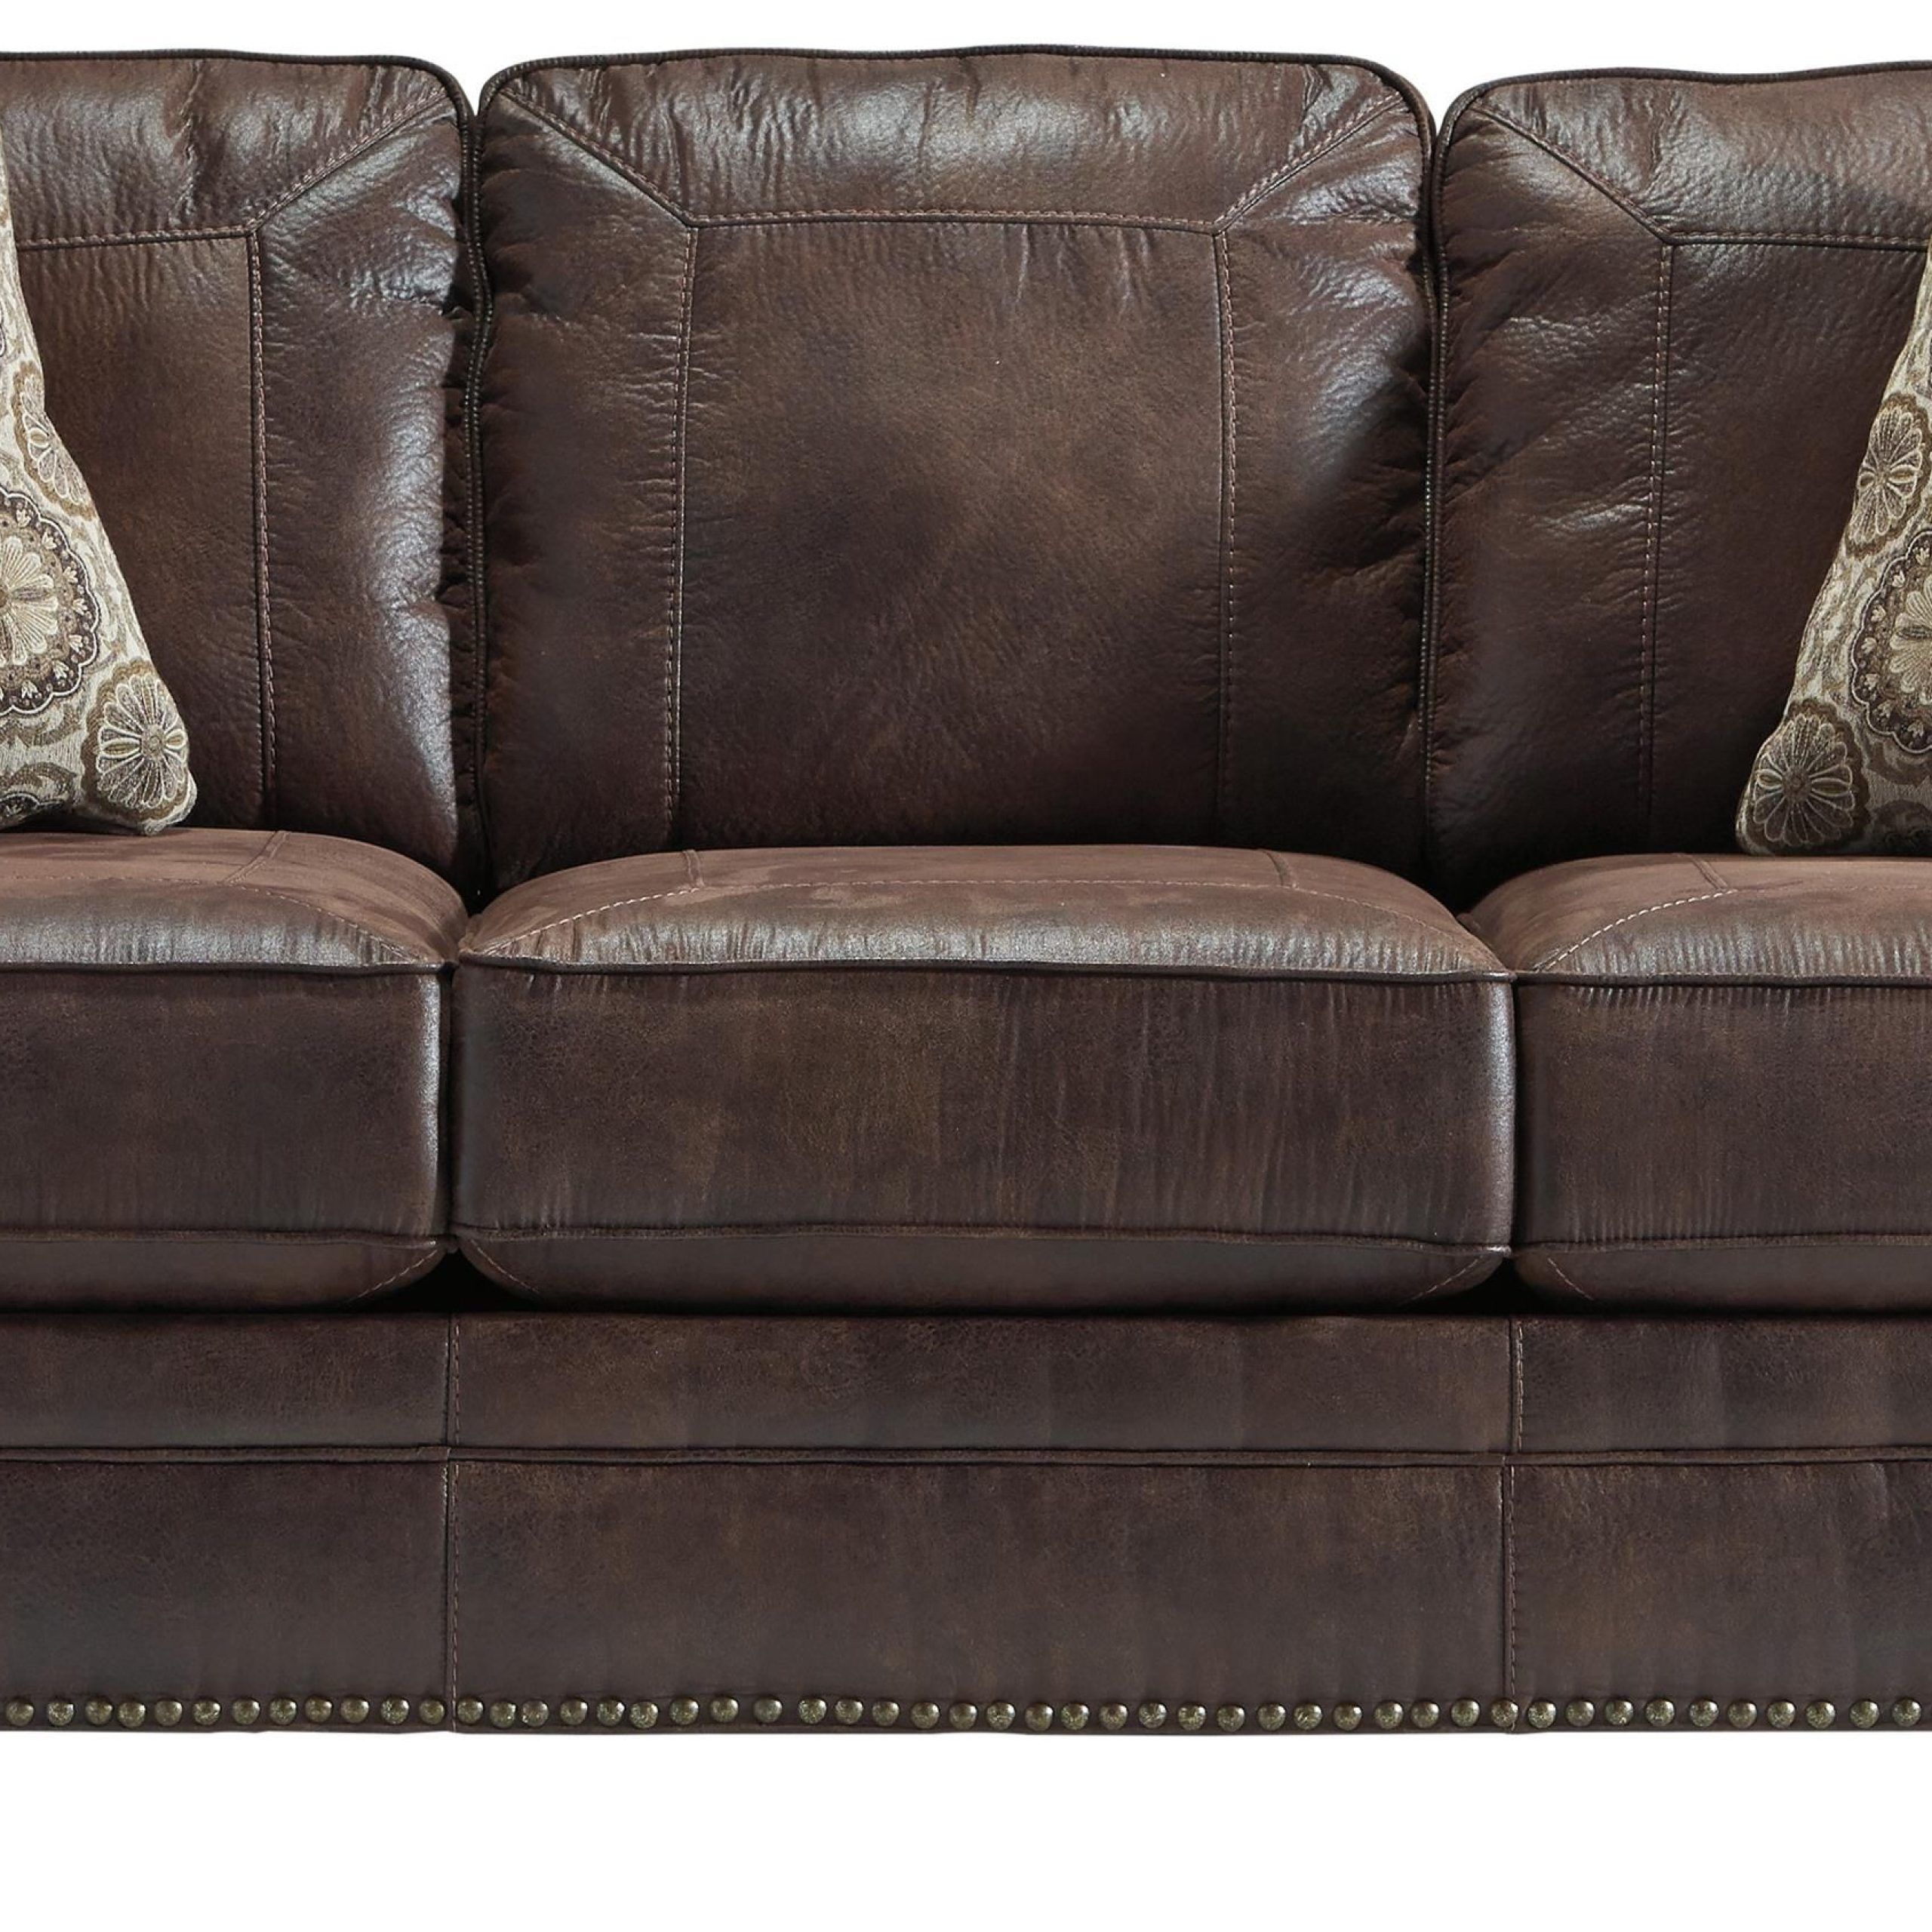 Beni Queen Sofa Sleepertrendz At Ruby Gordon Home | Faux Leather With Regard To Faux Leather Sofas In Dark Brown (View 11 of 20)